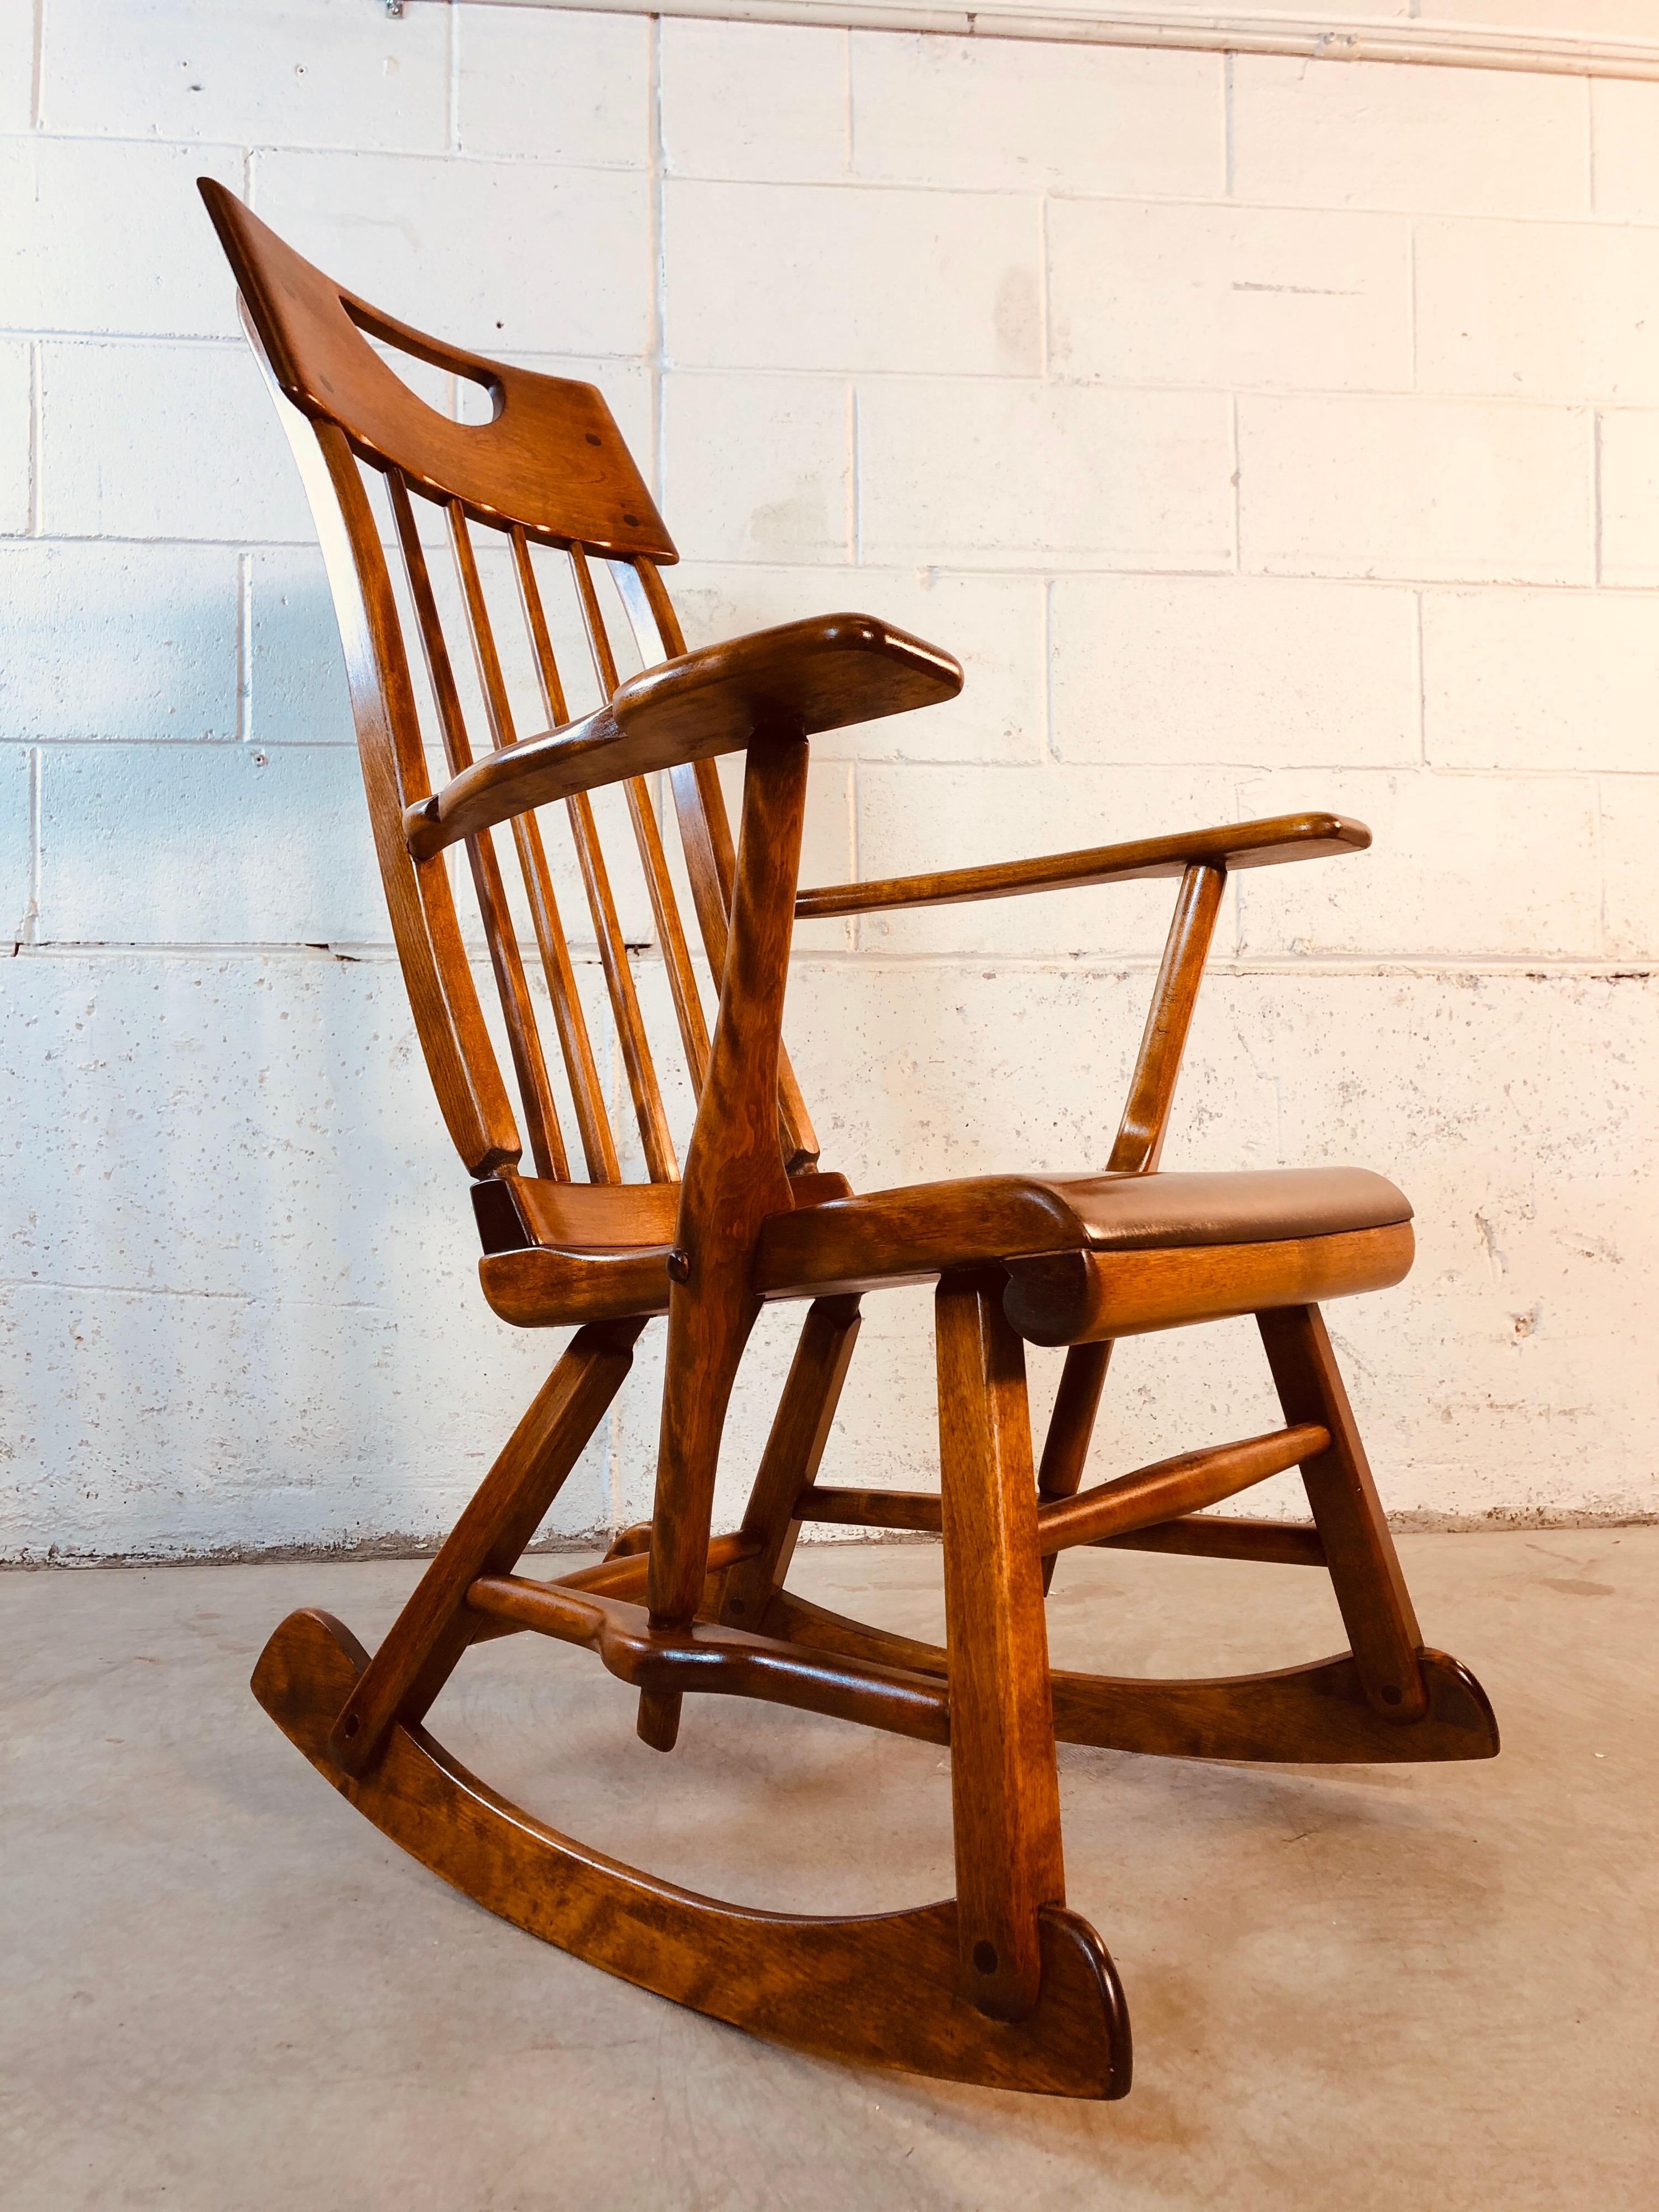 Colonial American High-Back Rocking Chair by Herman De Vries for Sikes Furniture 1